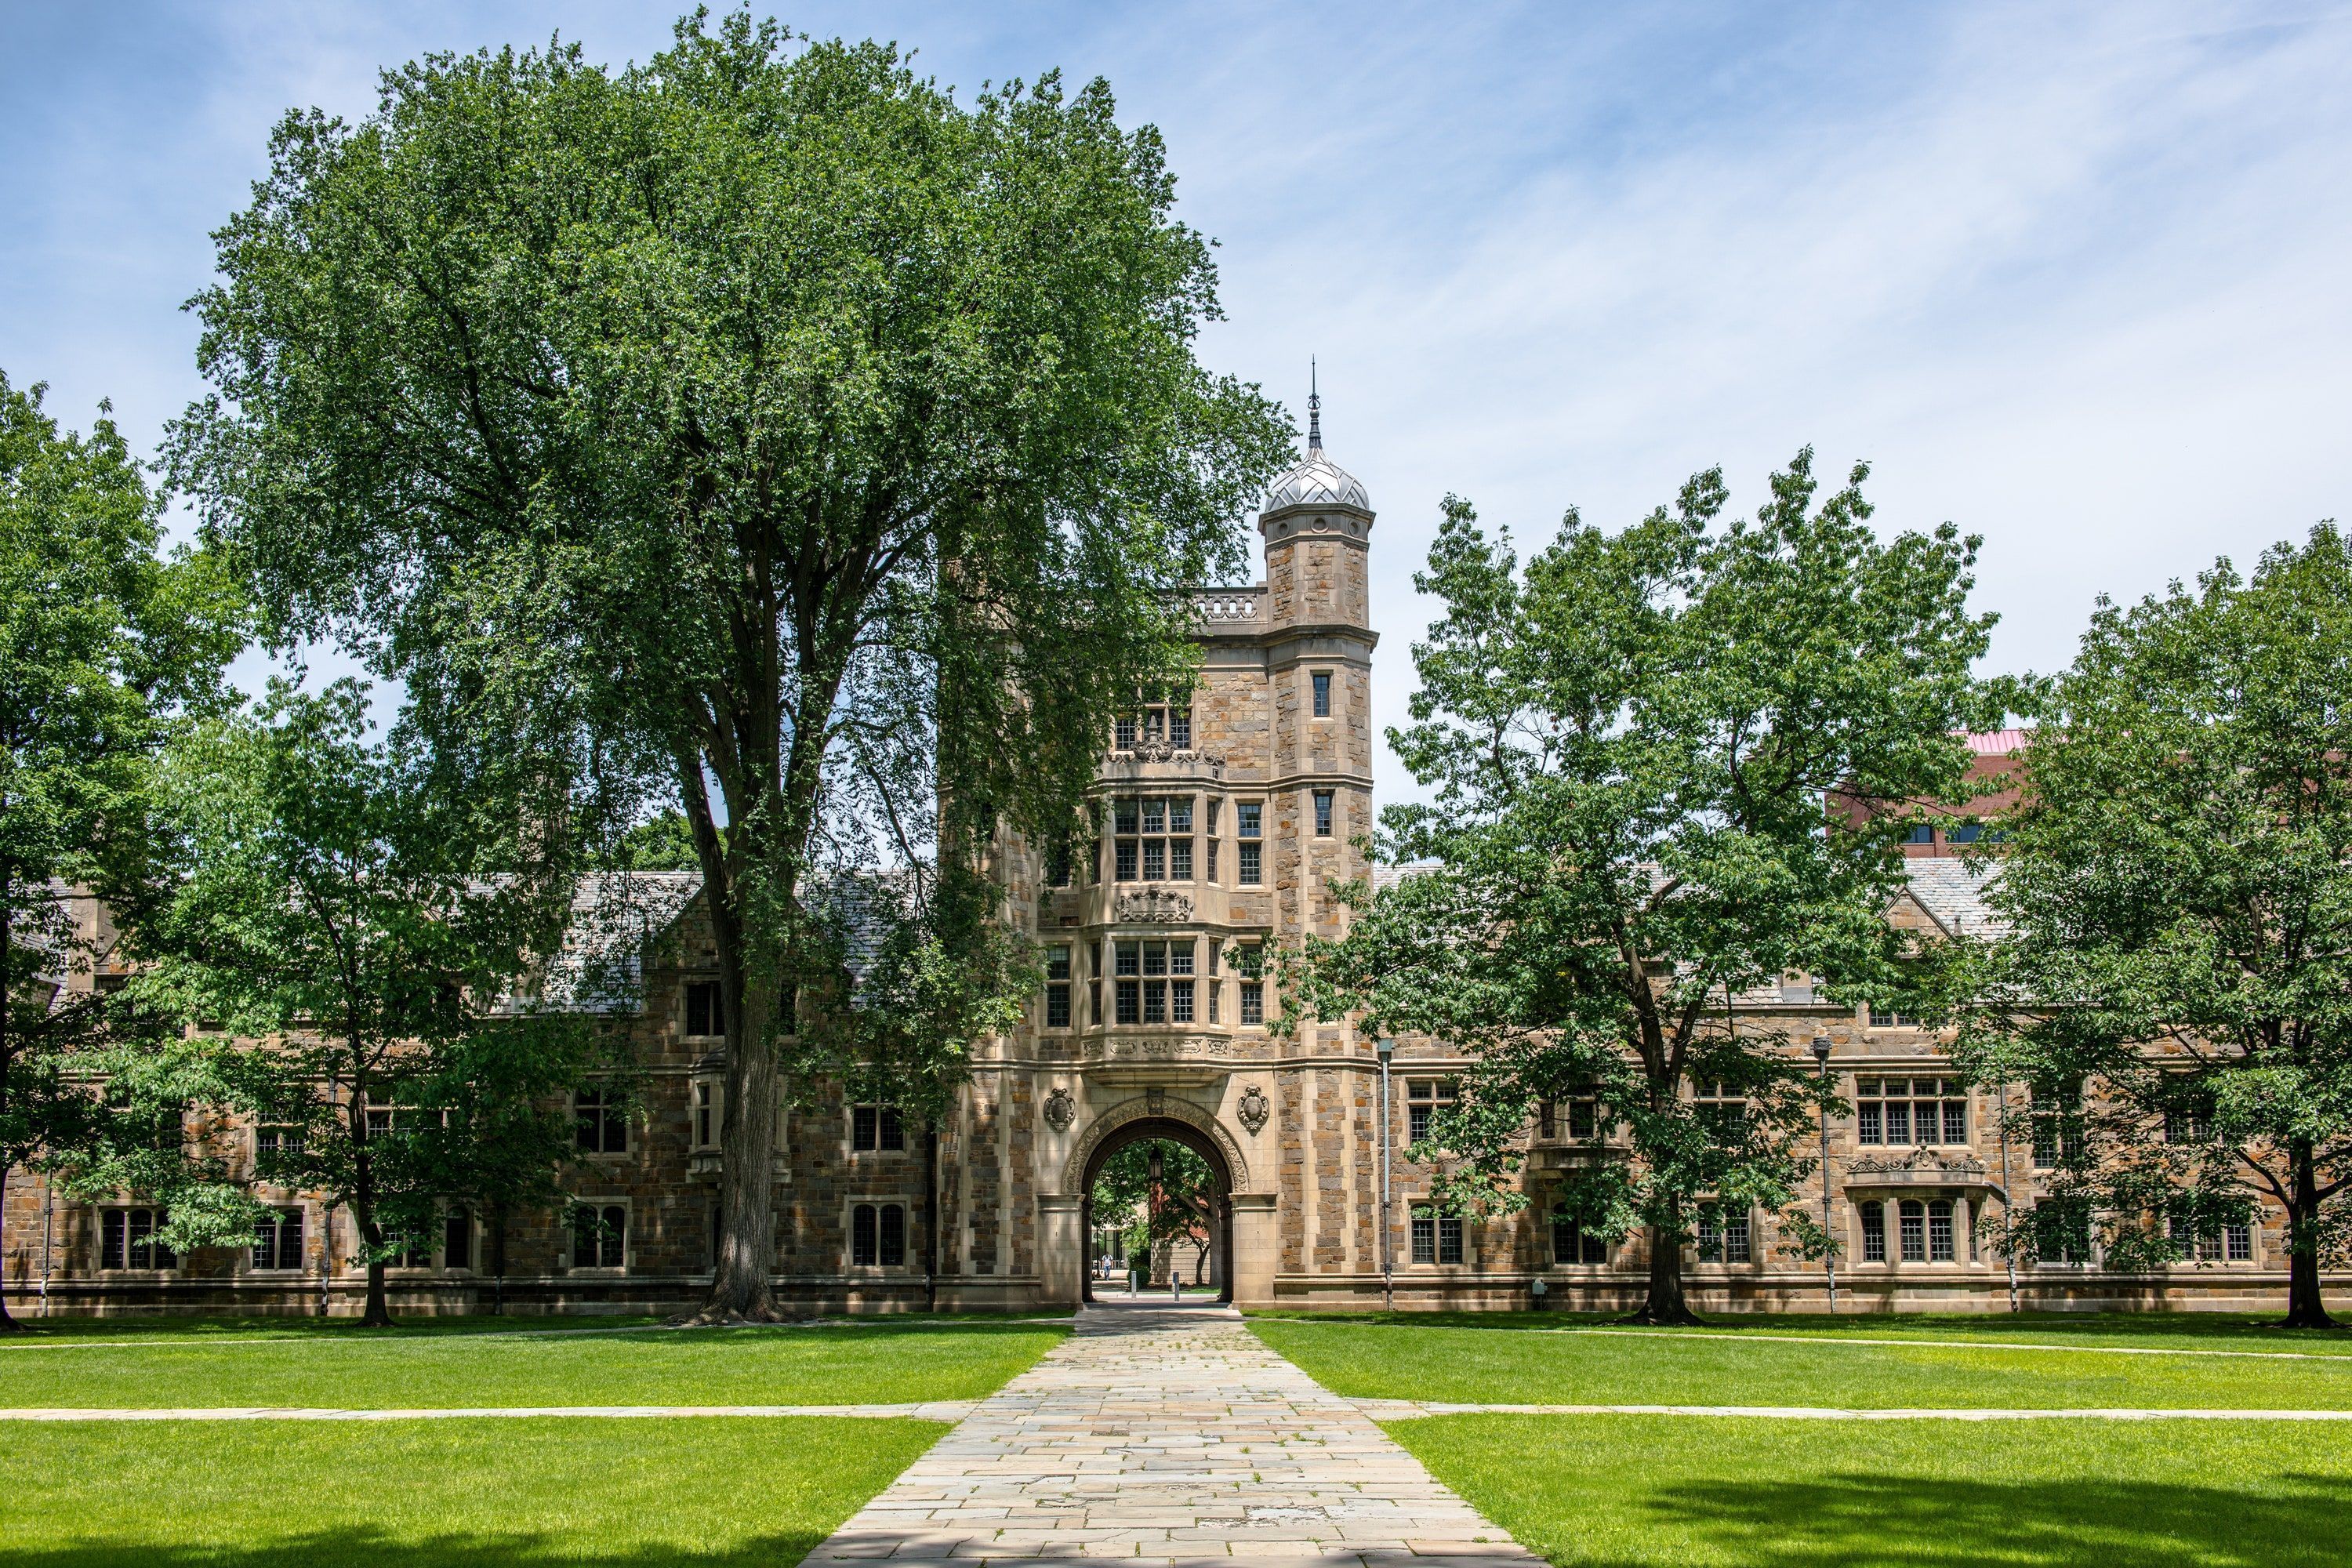 Prettiest College Campuses in the U.S., From Amherst to Wesleyan. Condé Nast Traveler